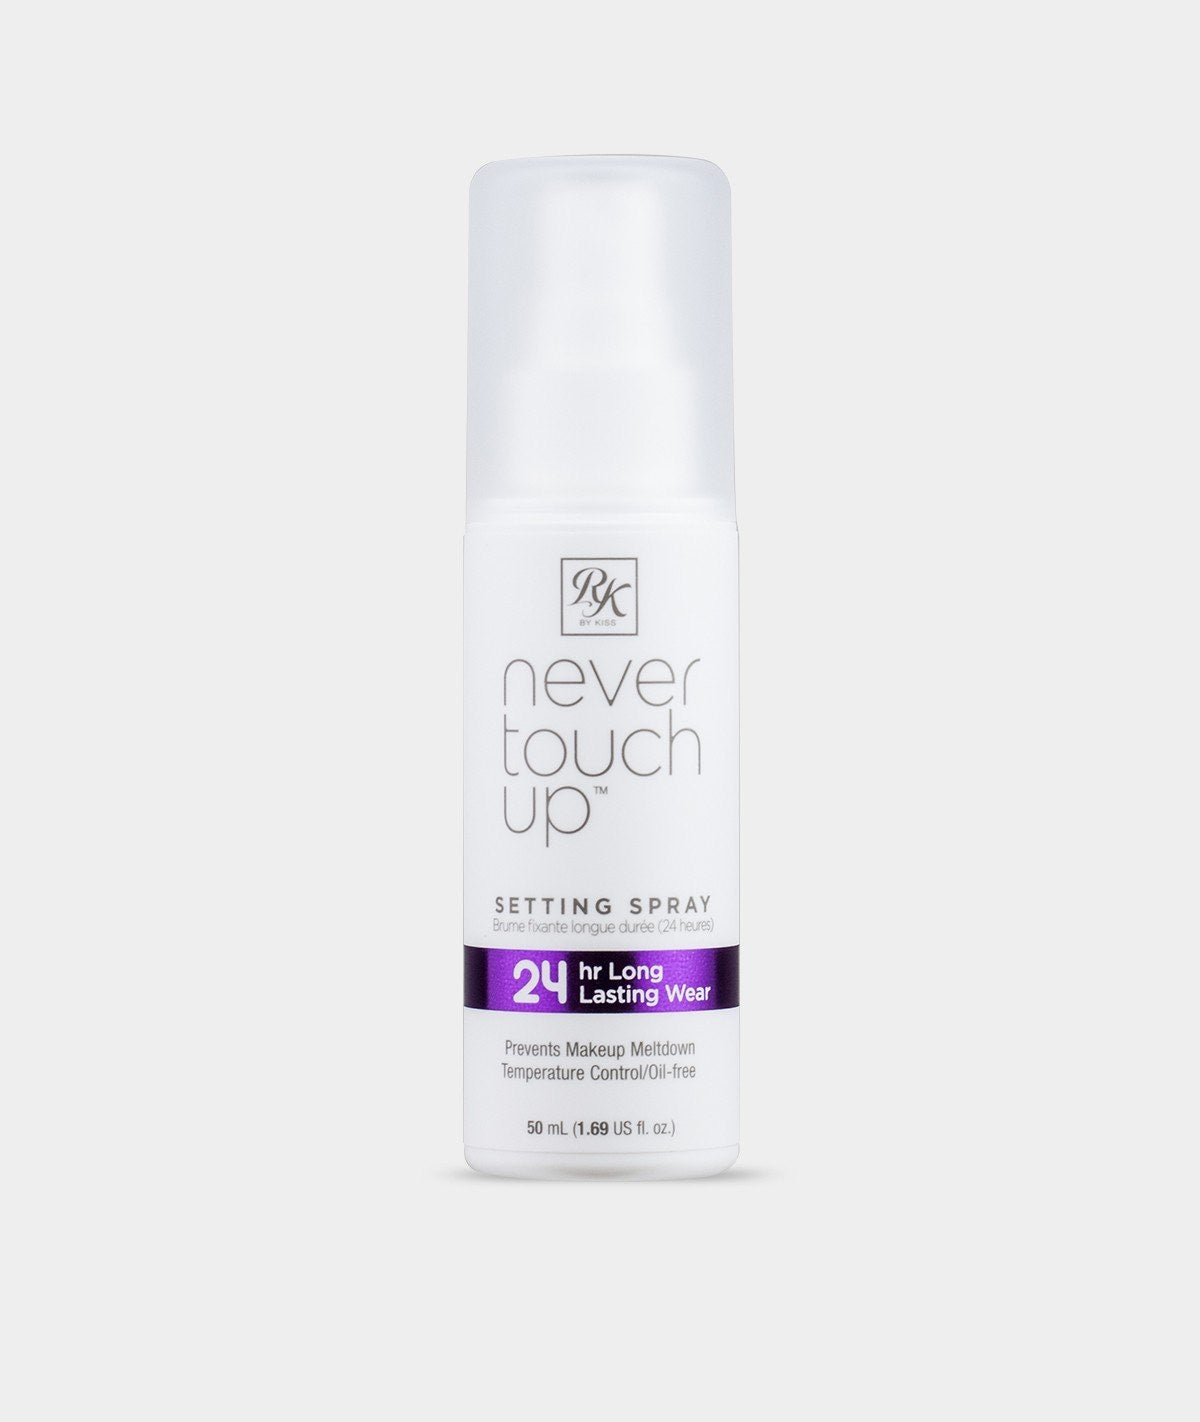 Rk by kiss never touch up 24hr setting spray